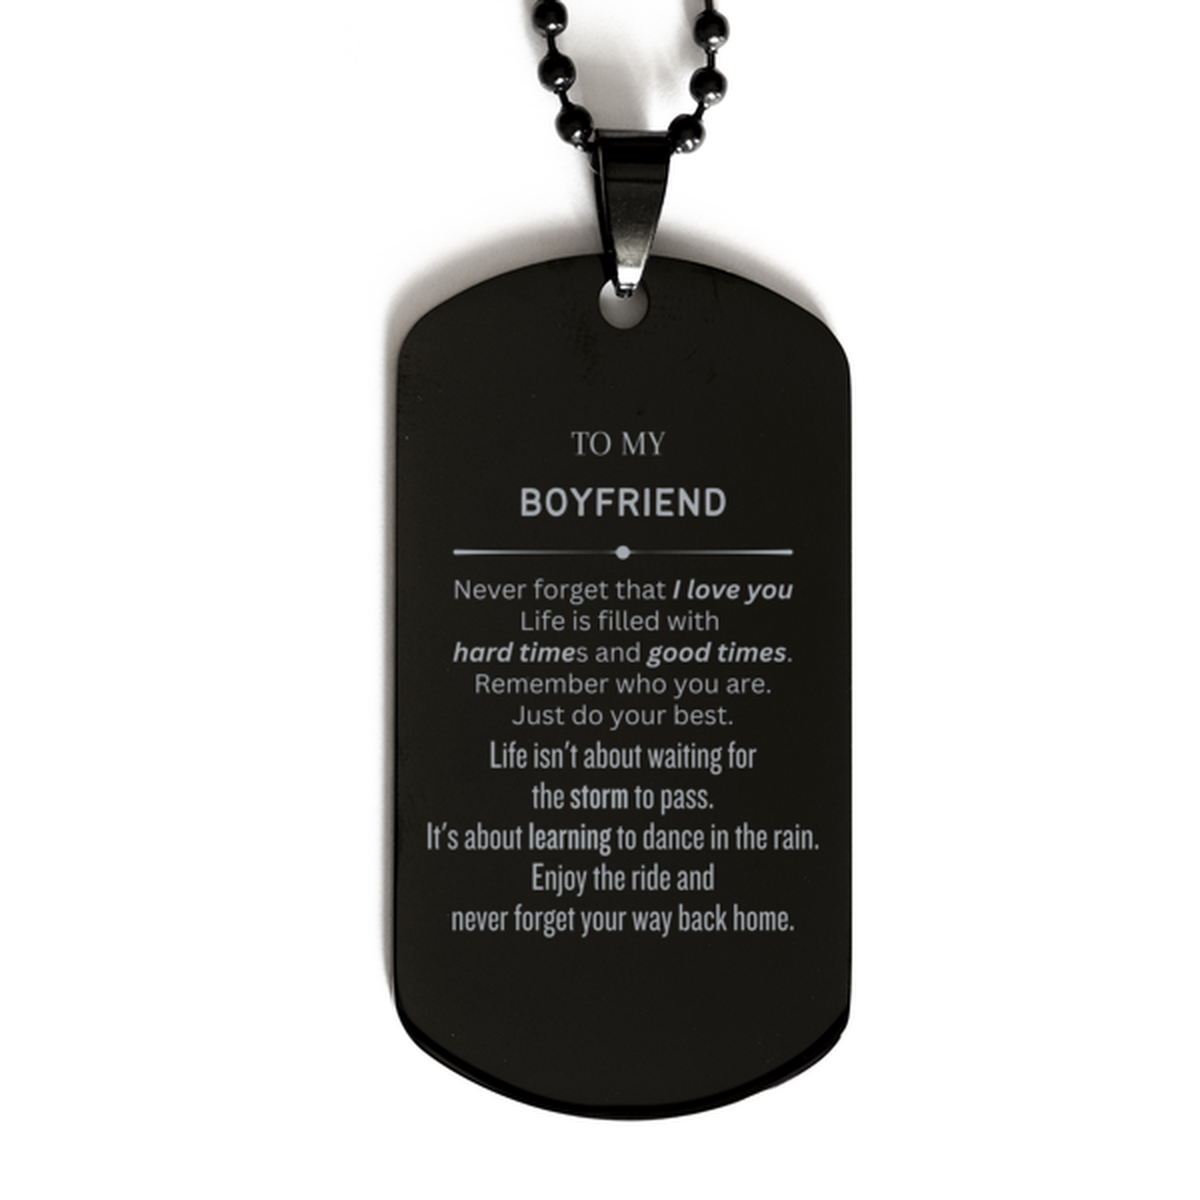 Christmas Boyfriend Black Dog Tag Gifts, To My Boyfriend Birthday Thank You Gifts For Boyfriend, Graduation Unique Gifts For Boyfriend To My Boyfriend Never forget that I love you life is filled with hard times and good times. Remember who you are. Just d